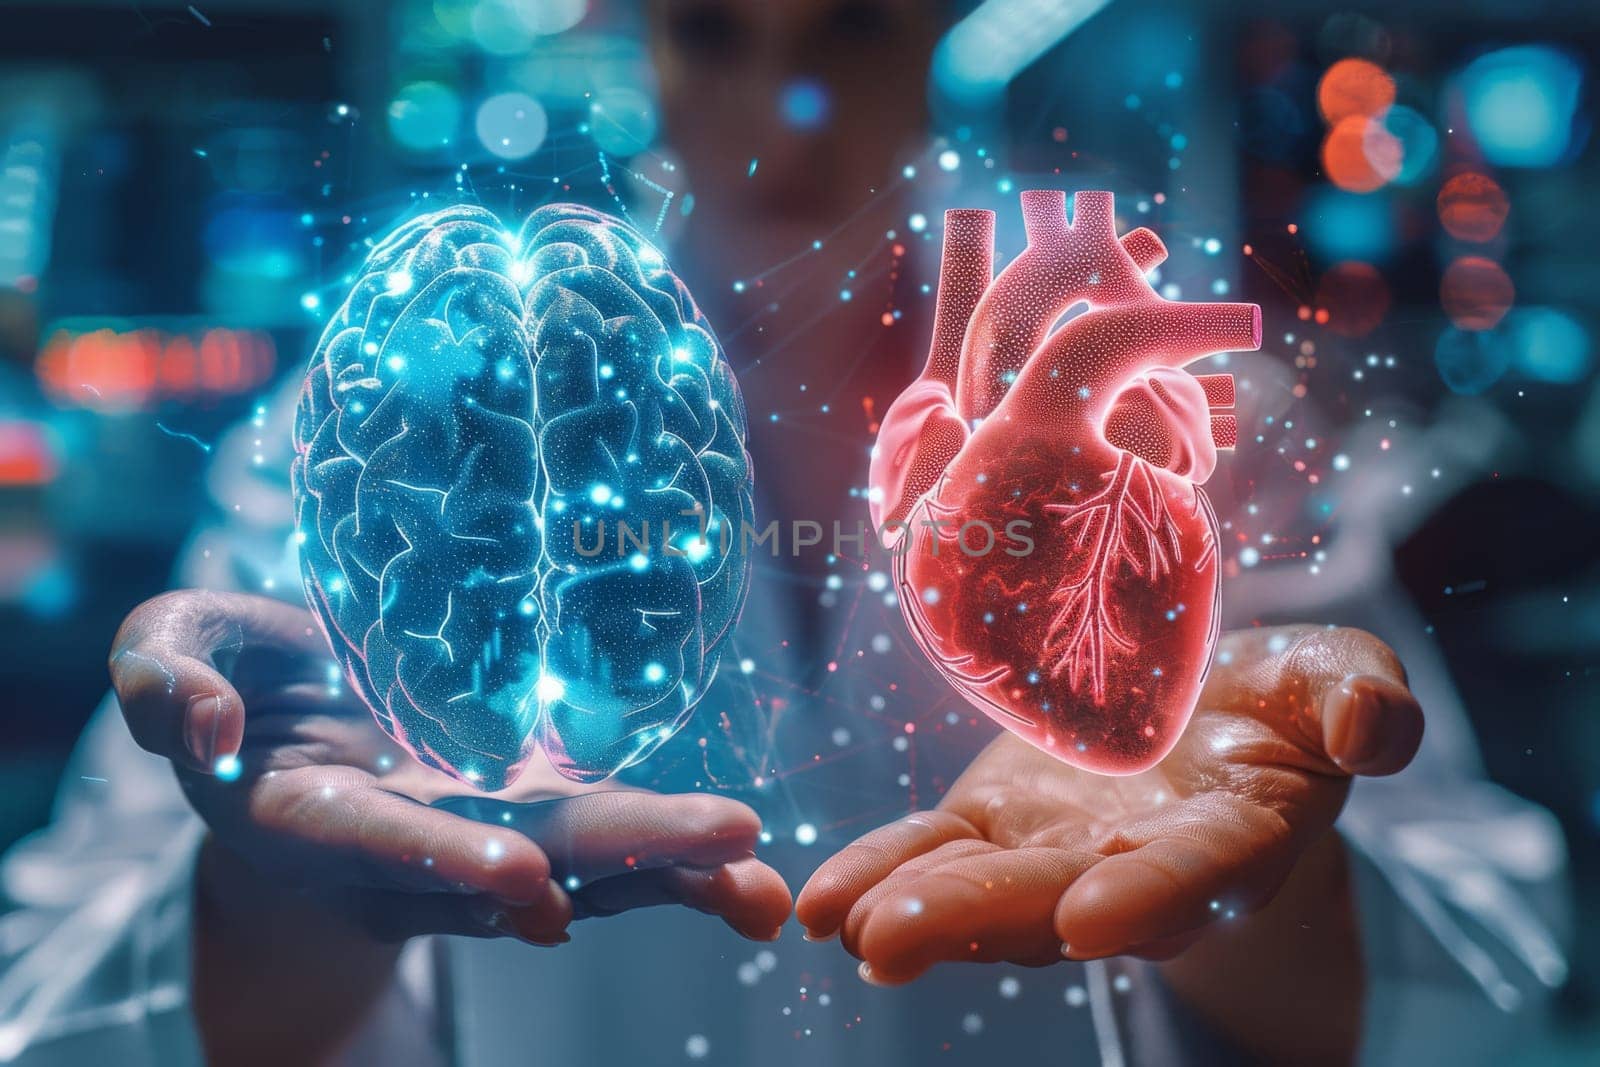 A doctor is holding a heart in his hand and pointing to it. The heart is surrounded by a network of lines, which gives the impression of a computer-generated image